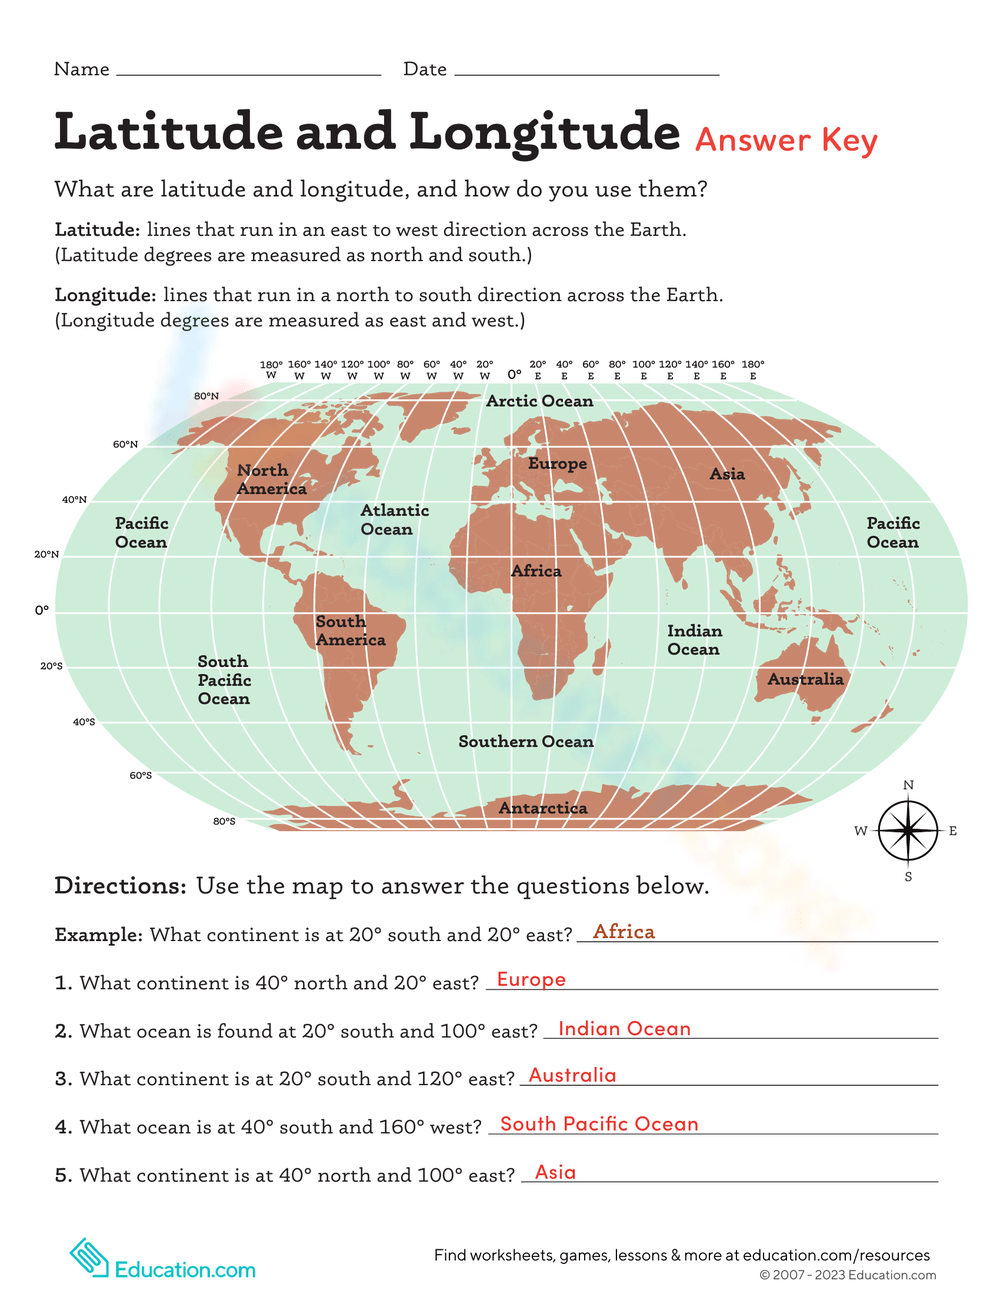 free-collection-of-latitude-and-longitude-worksheets